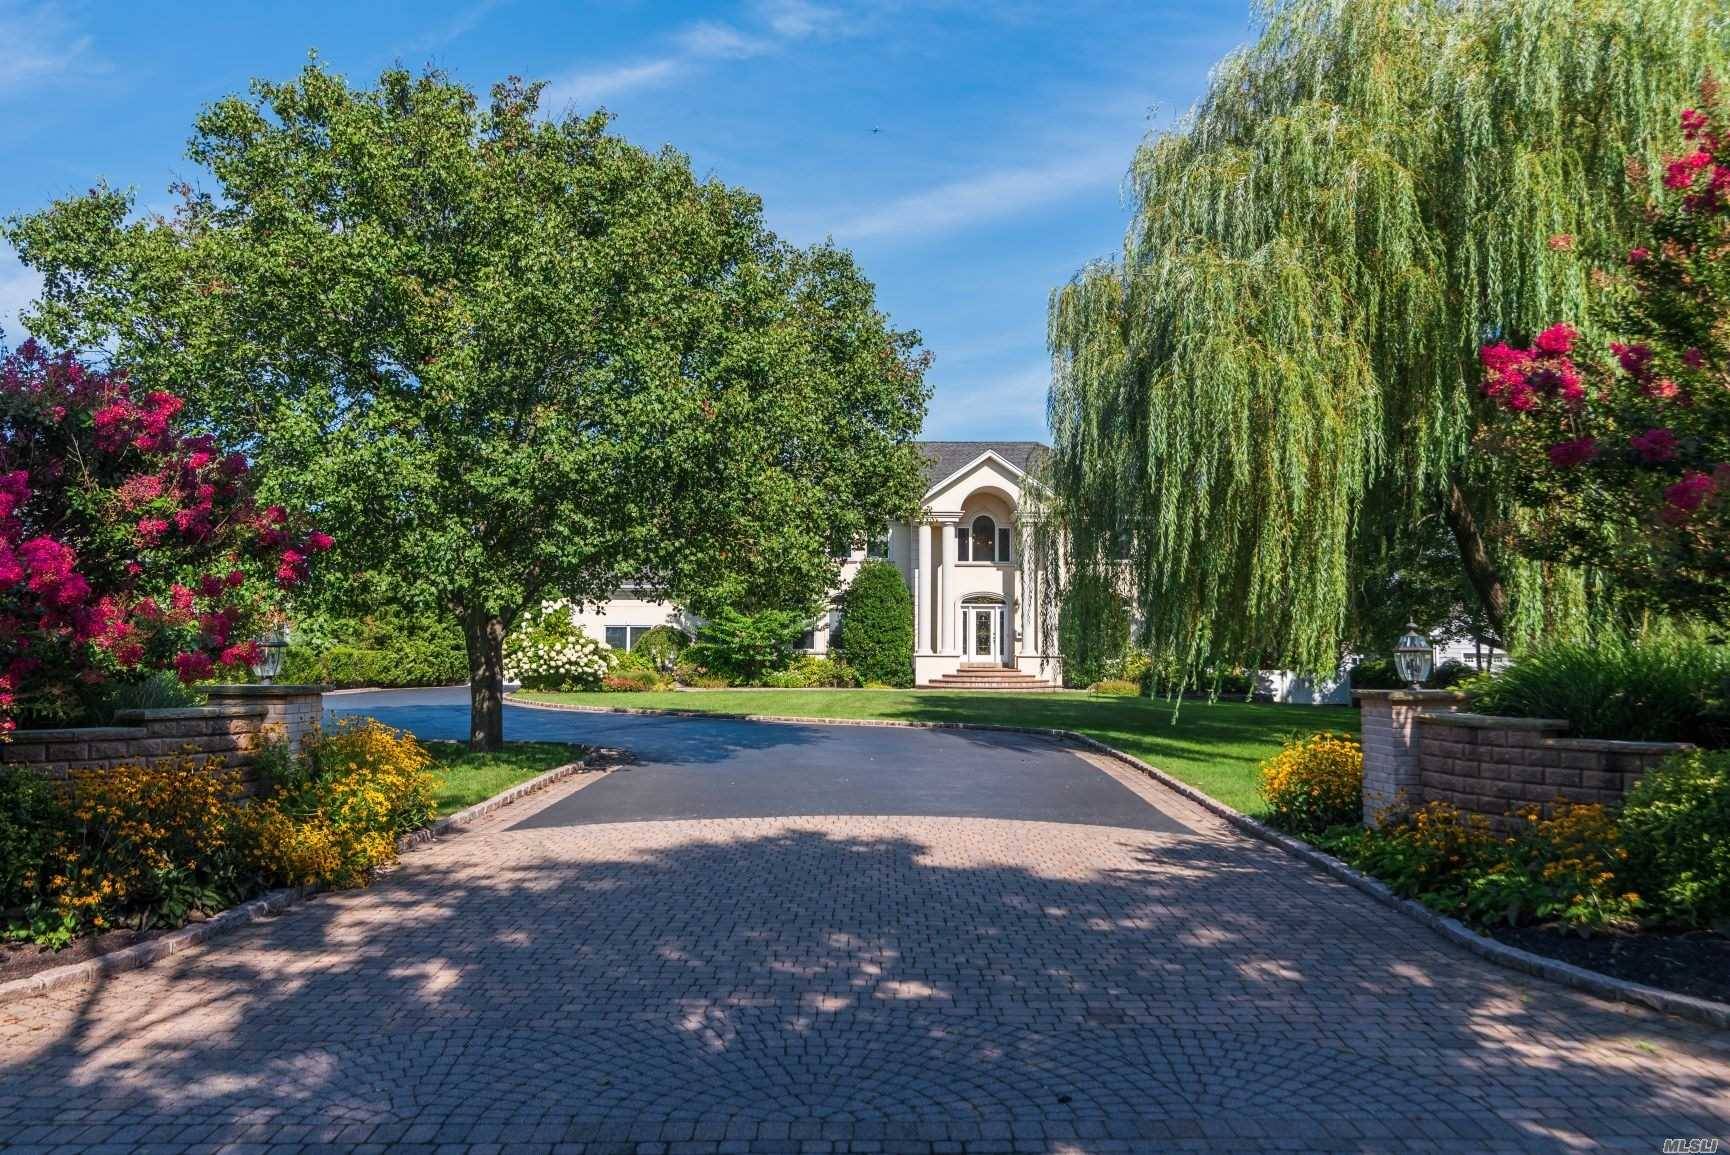 Stately Waterfront Colonial On Shy 1 acre property Down Coveted West Islip Rd.